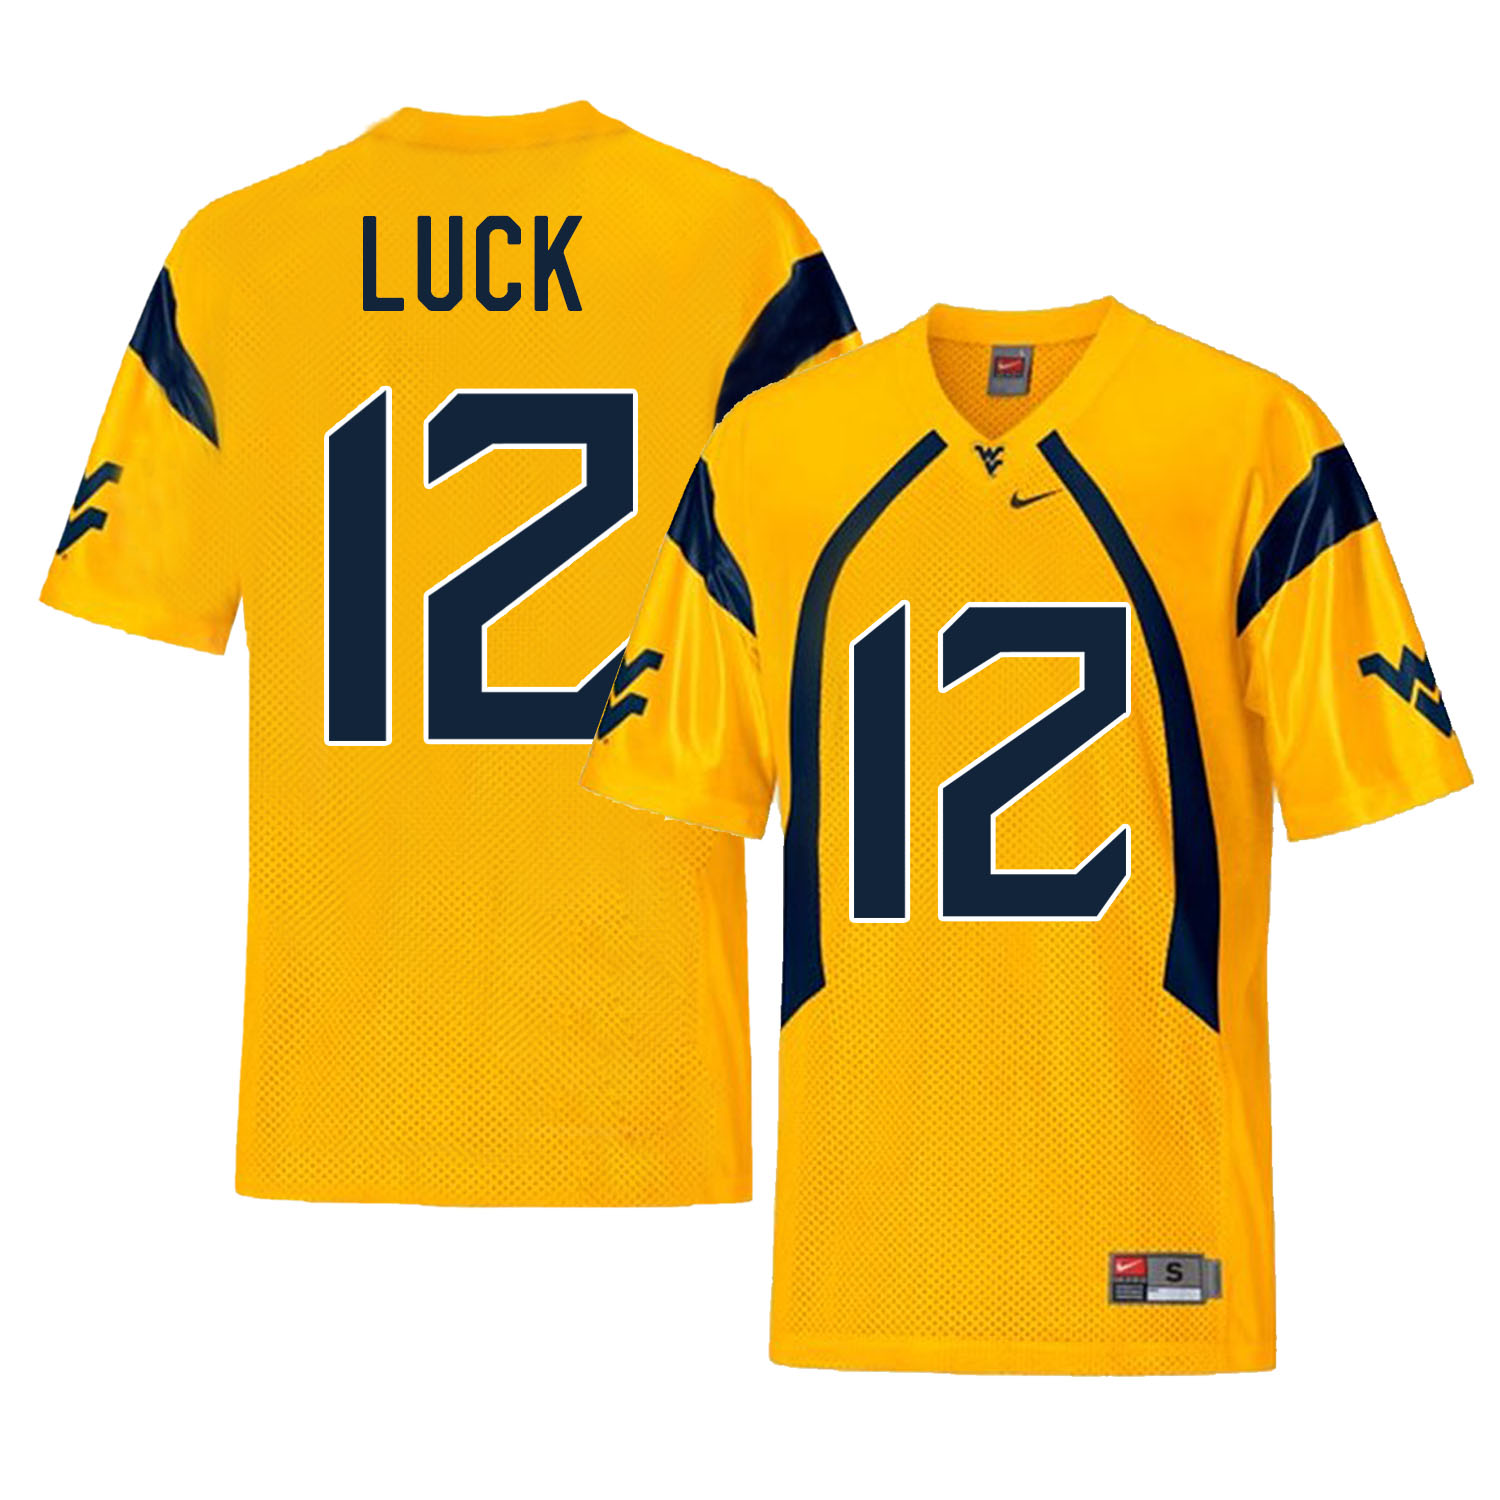 West Virginia Mountaineers 12 Oliver Luck Gold College Football Jersey